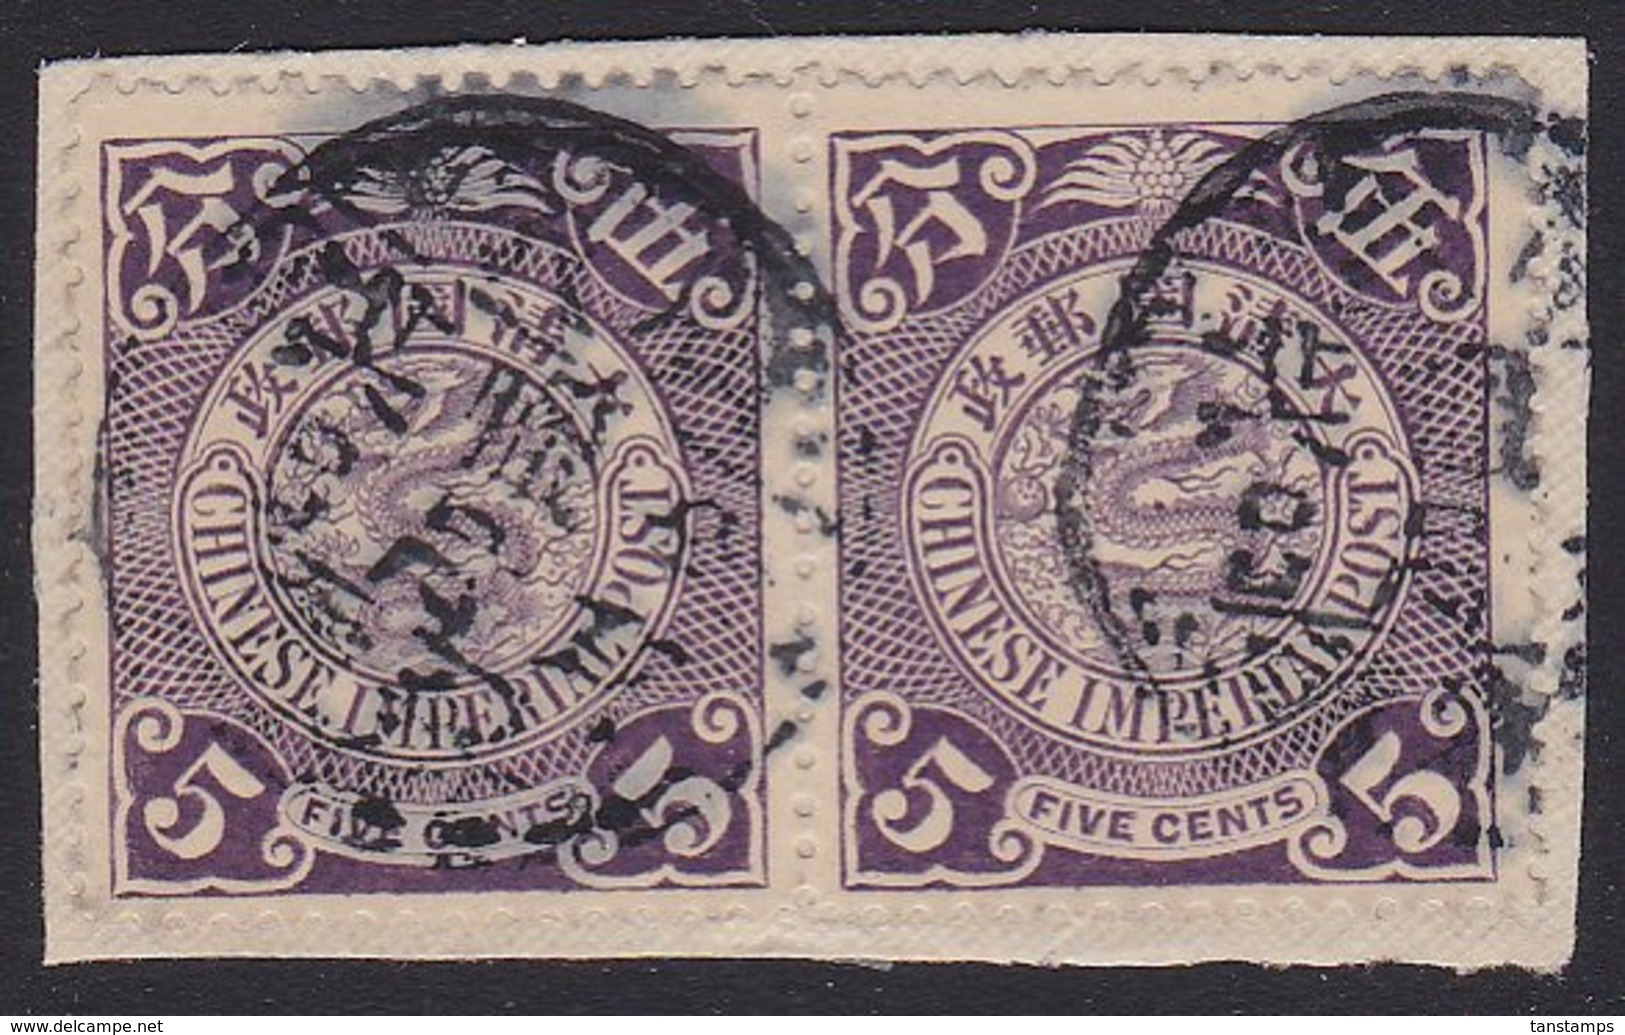 IMPERIAL CHINA 5c COILING DRAGON NATIVE VILLAGE CHOP ON PAIR - Used Stamps